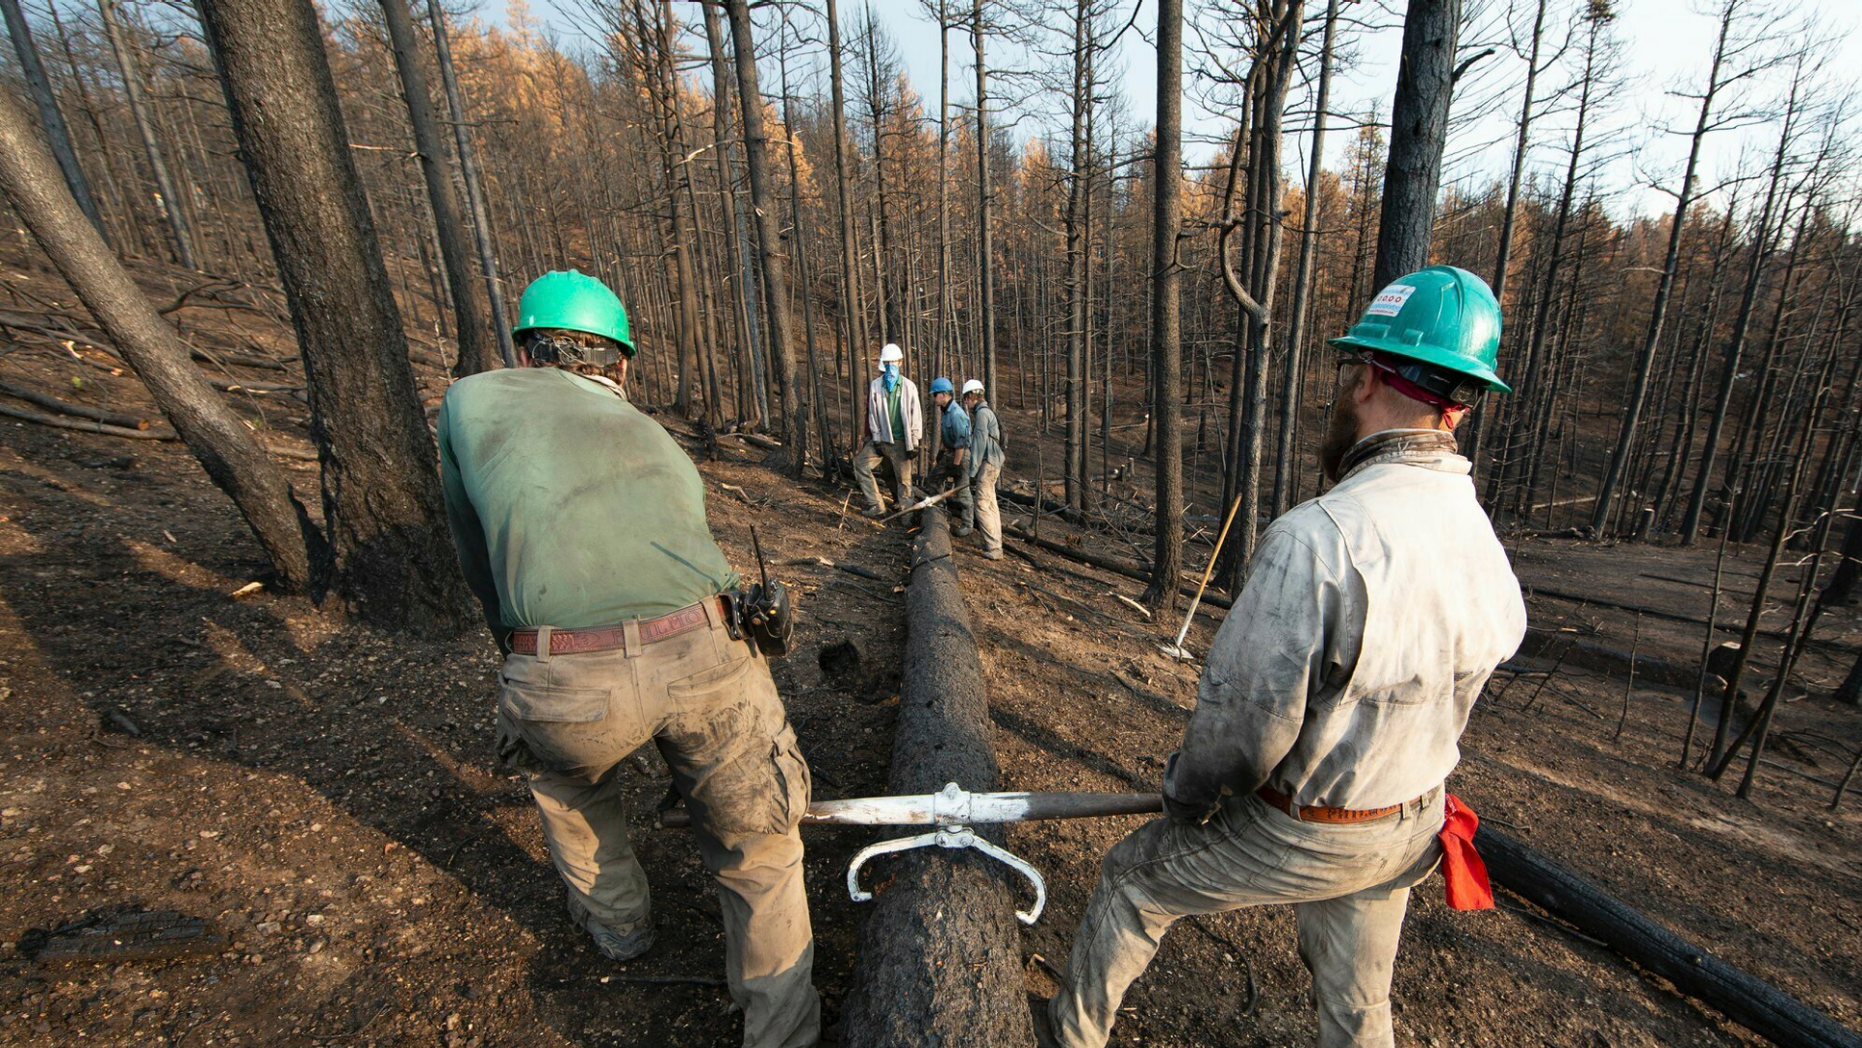 This undated photo provided by the Philmont Scout Ranch shows members of the Philmont Recovery Corps moving a ball into place for a new contour along a charred slope. The historic ranch near Cimarron, New Mexico, is rebuilding itself after a devastating forest fire that burned nearly 44 square miles in 2018. The backcountry trails were wiped out, as well as the developed camps. (Philmont Scout Ranch via AP)